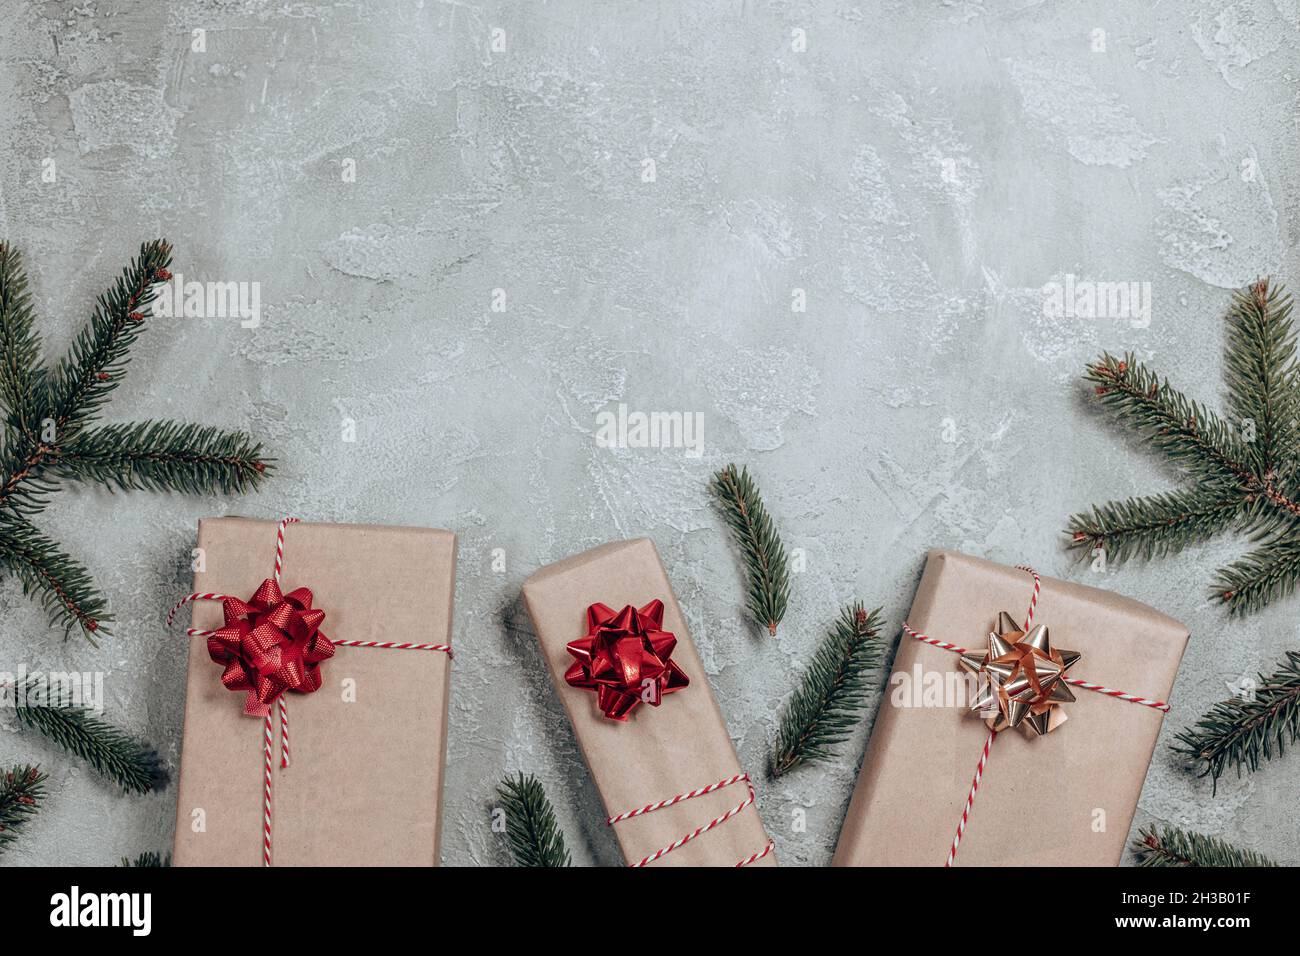 Fir tree branch and gift box, paper decorations on grey background. New Year holiday background. Flat lay, top view Stock Photo